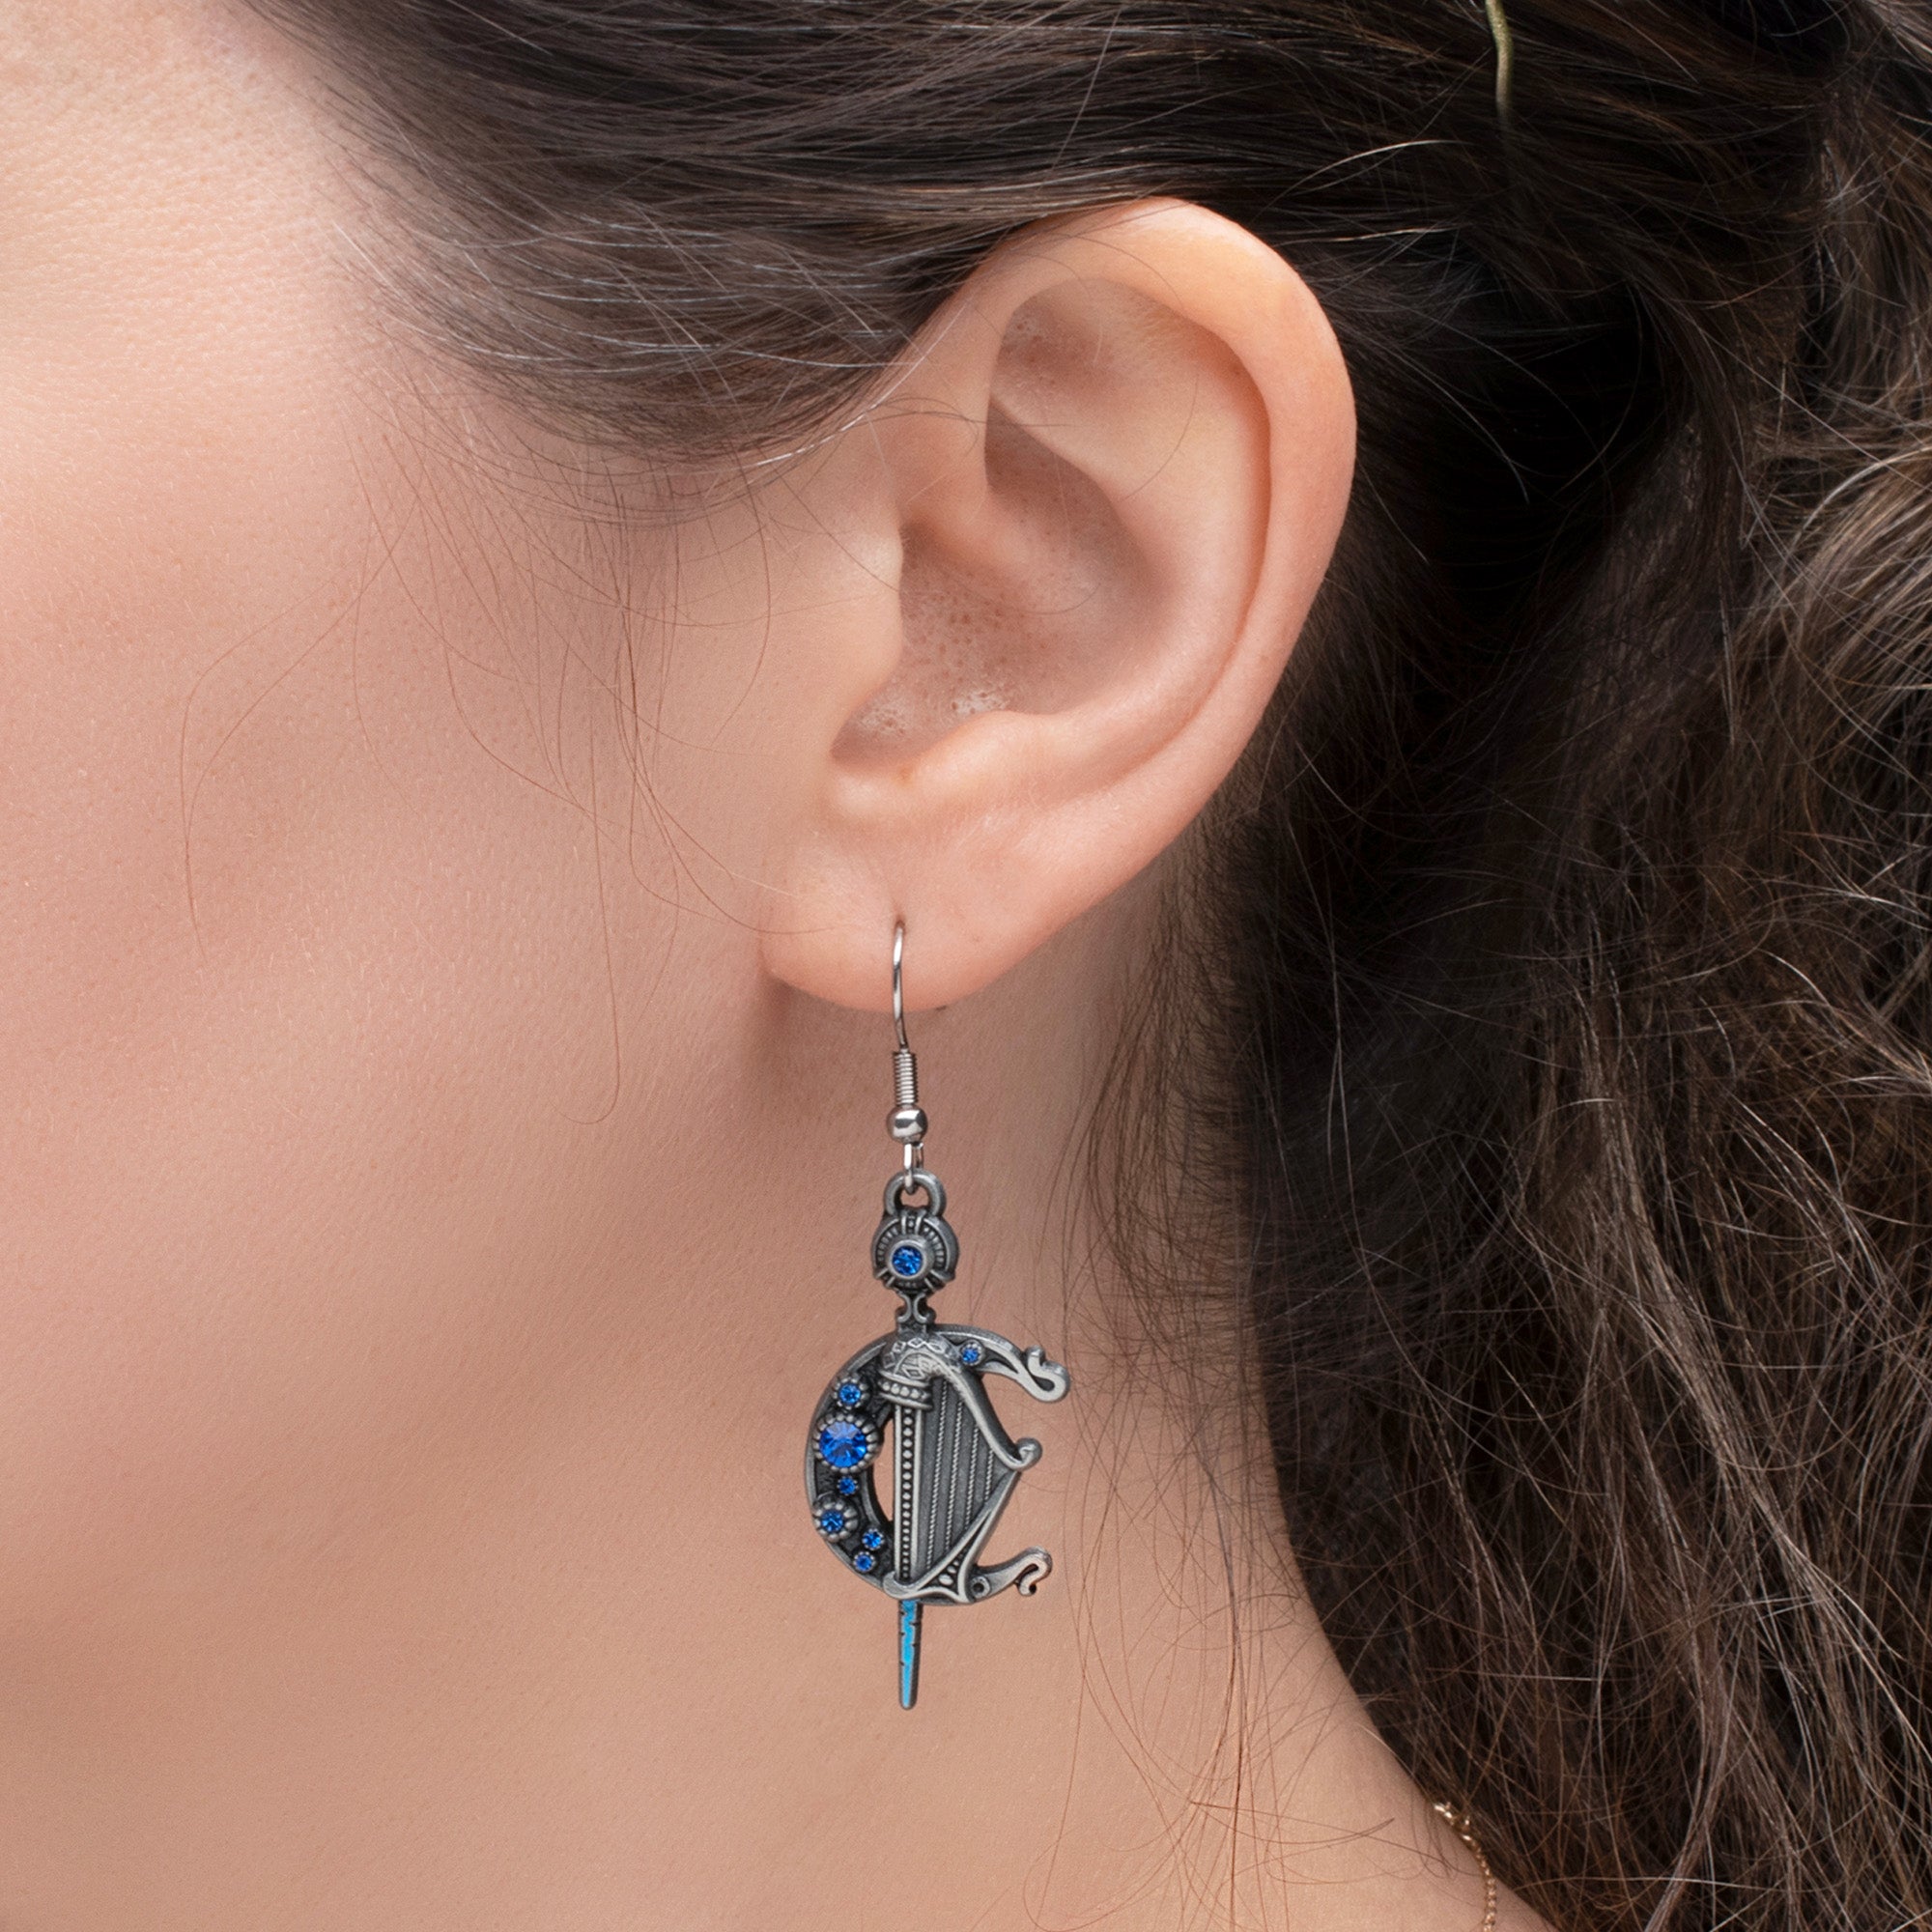 Dungeons and Dragons: Honor Among Thieves Harpers Guild Drop Earrings